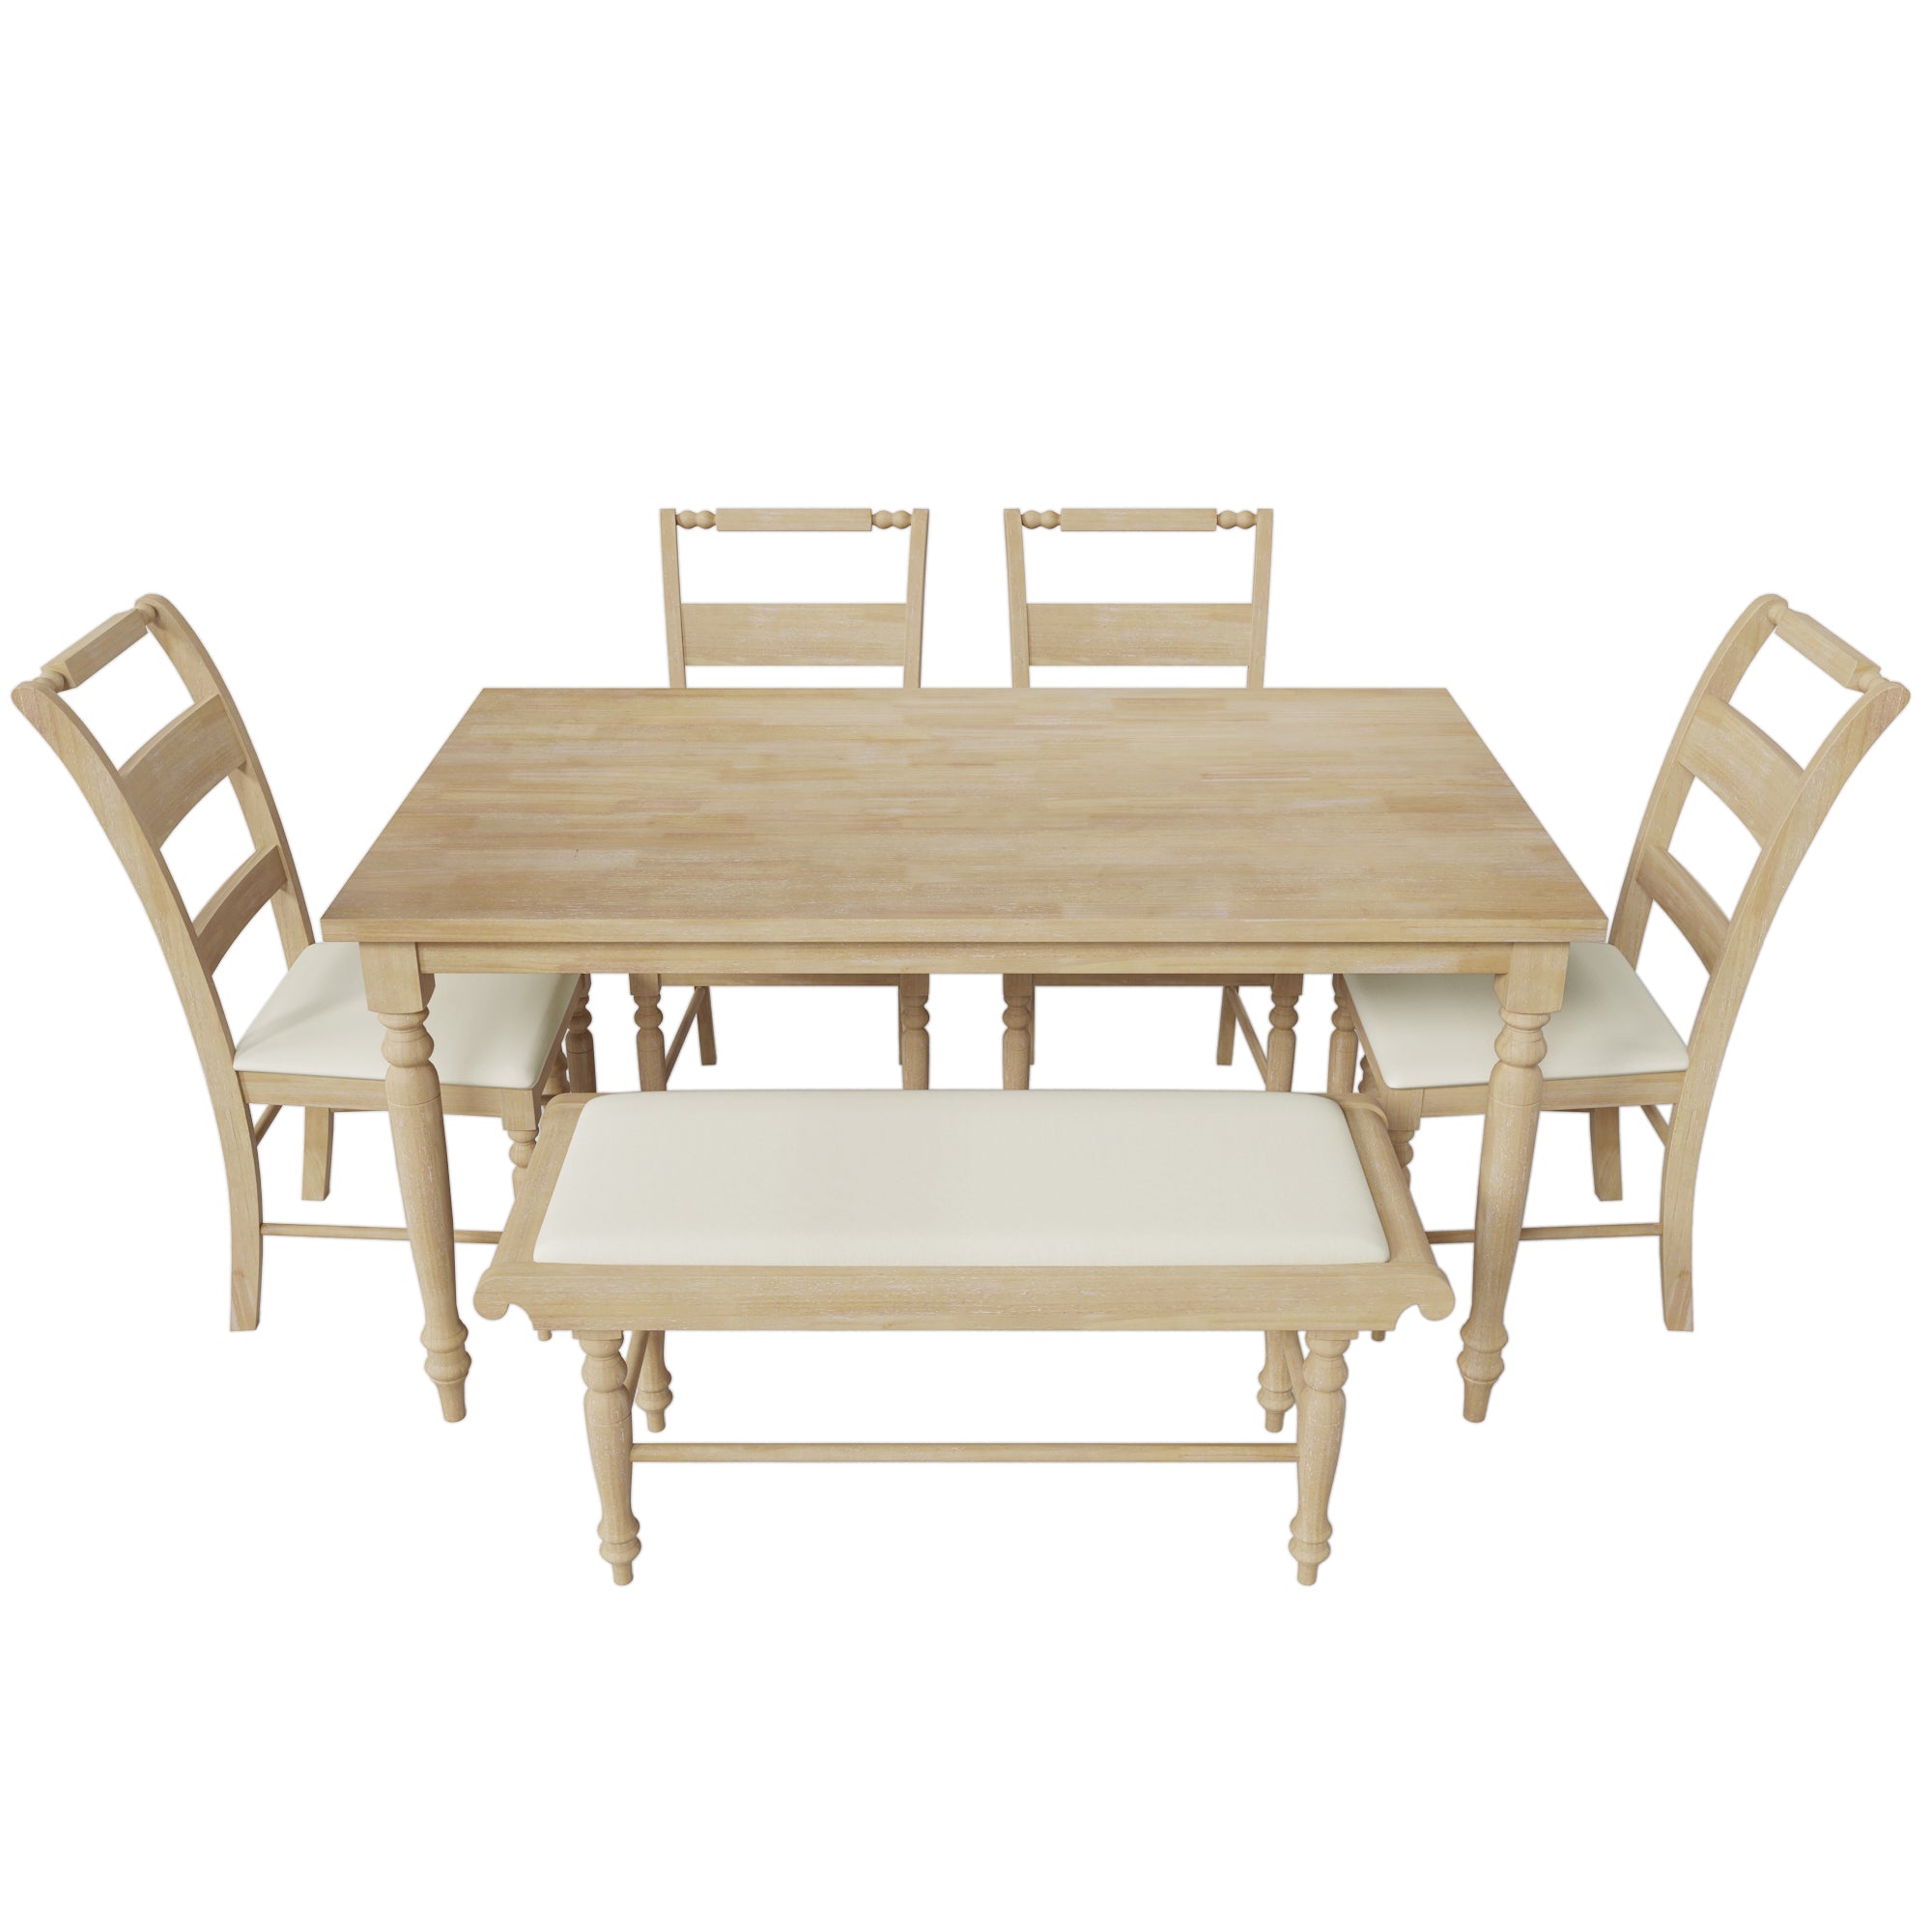 6-piece Dining Set with Turned Legs, Upholstered Dining Chairs and Bench - Pier 1